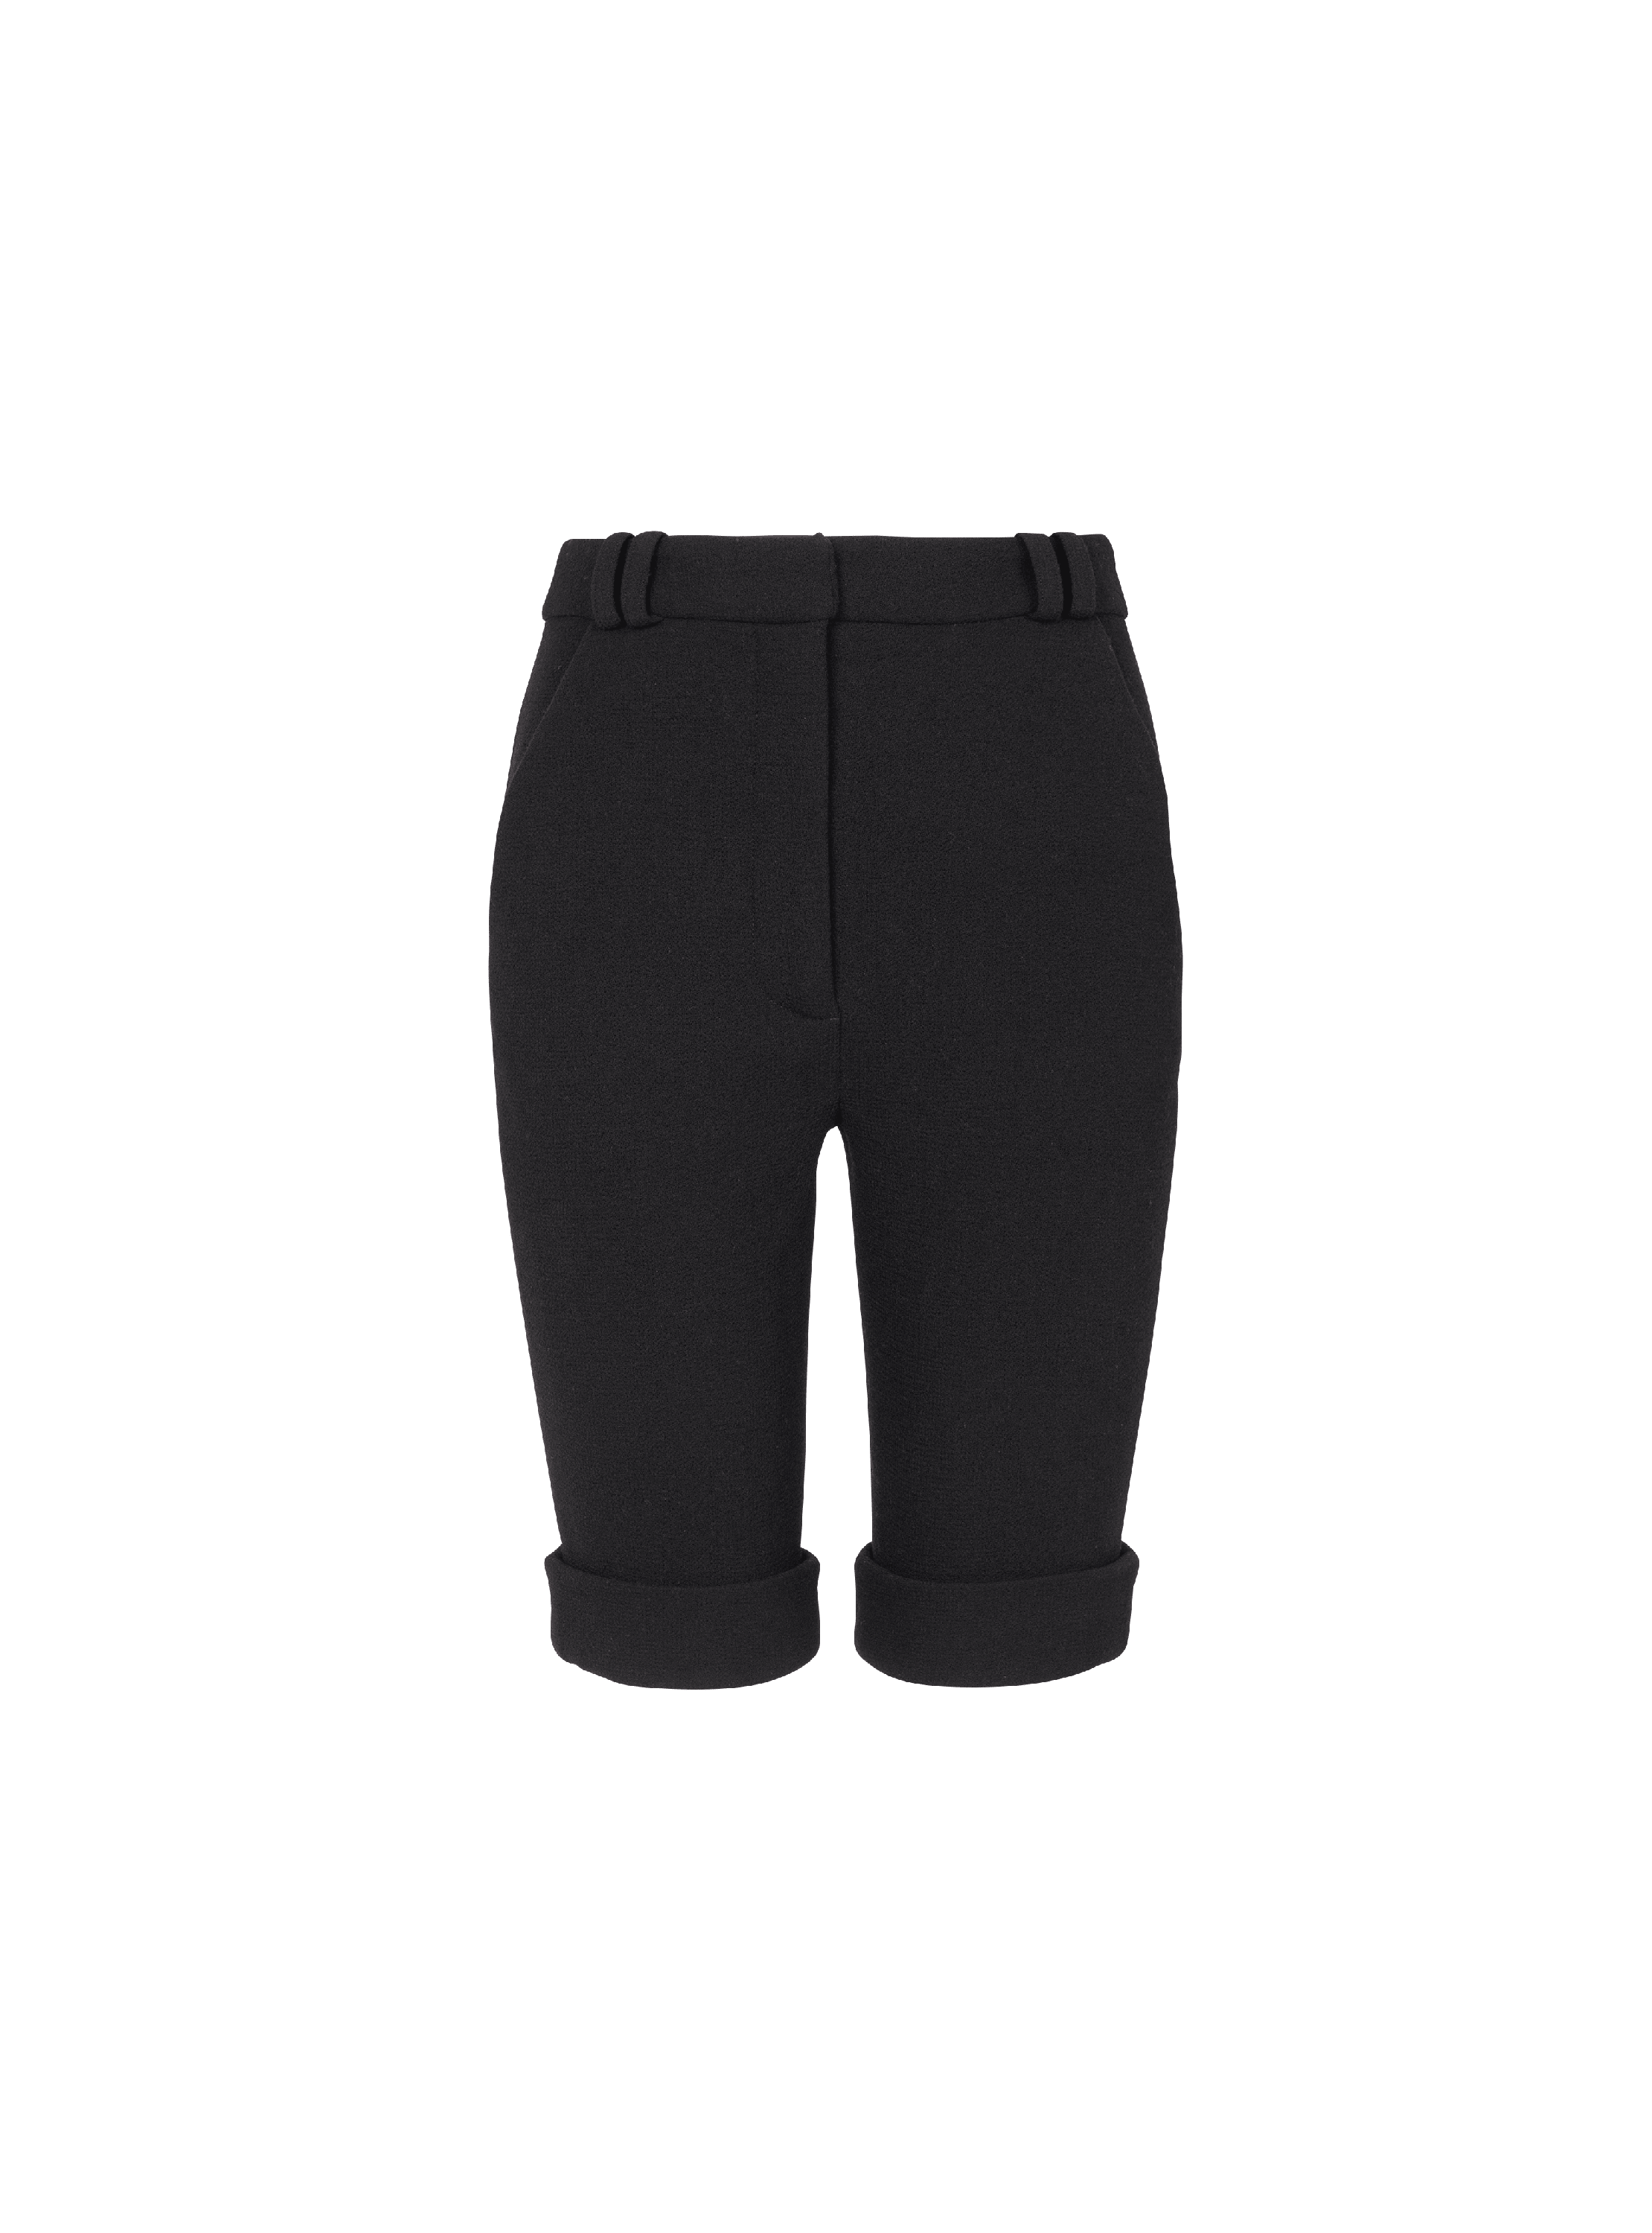 Cycling shorts in double crepe, black, hi-res